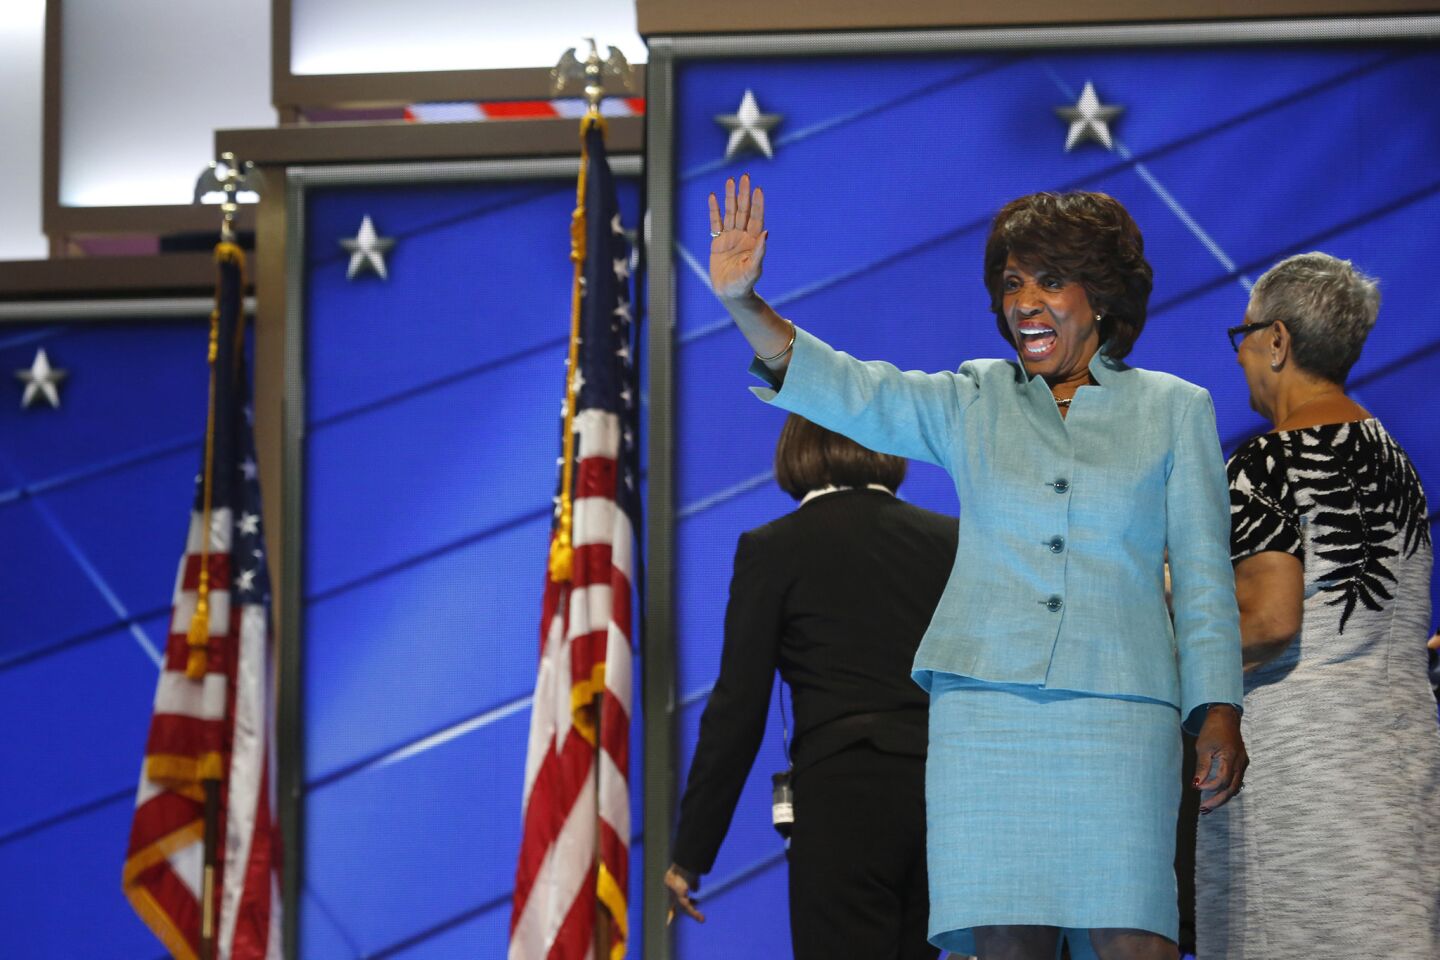 Representative Maxine Waters appears with other members of the Congressional Black Caucus on the third day of the Democratic National Convention.